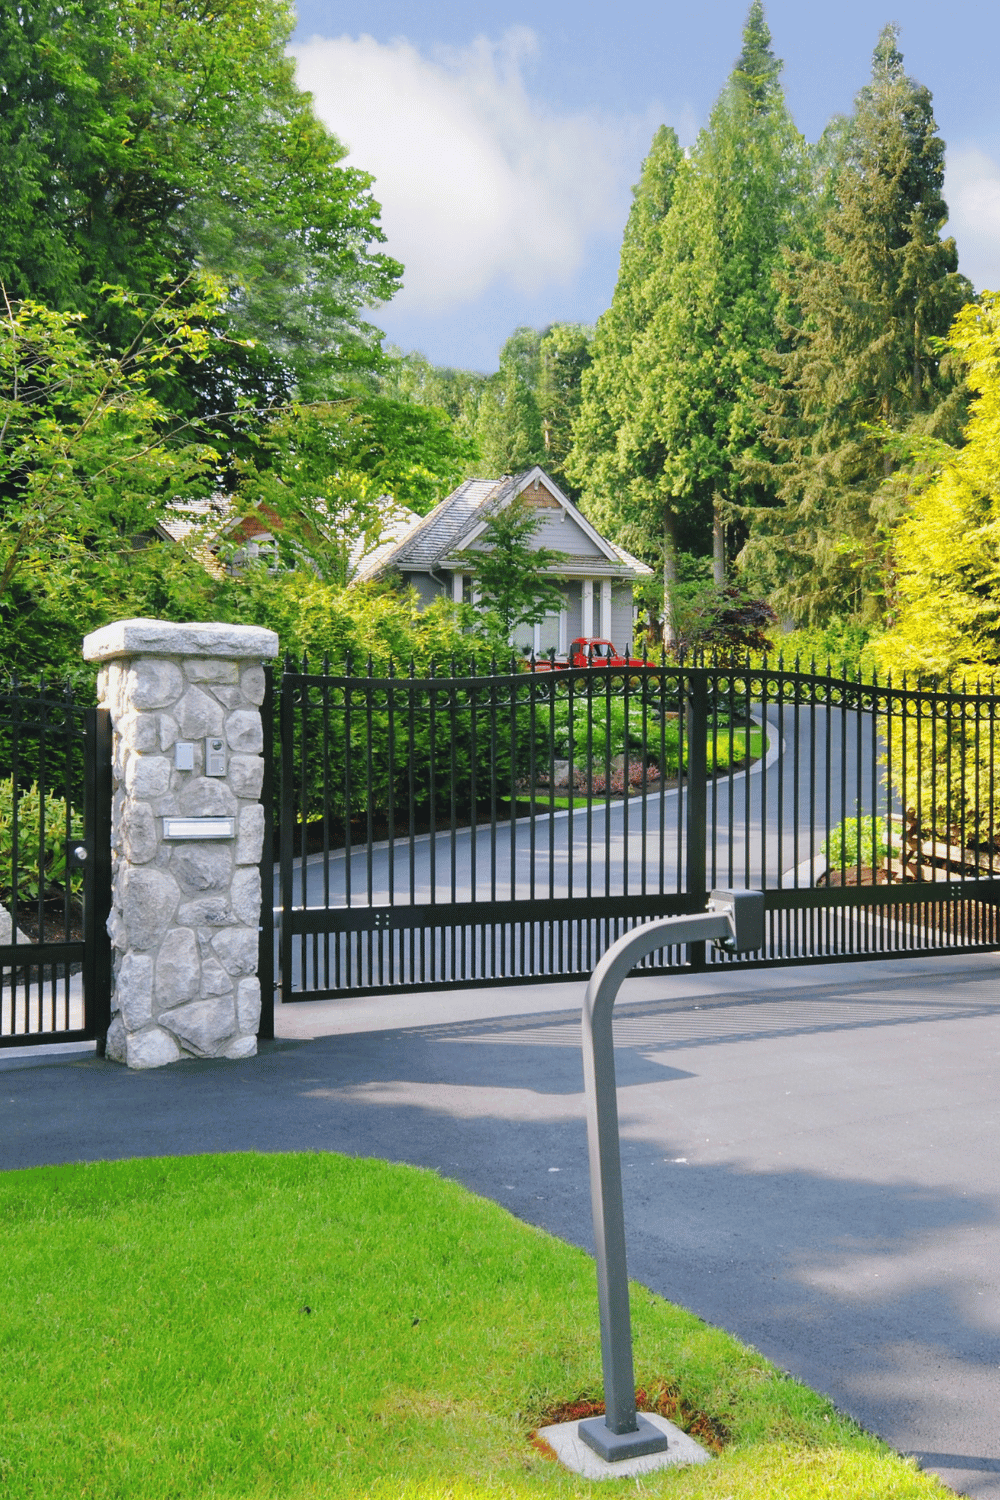 3 Things To Consider Before Getting A Resin Driveway